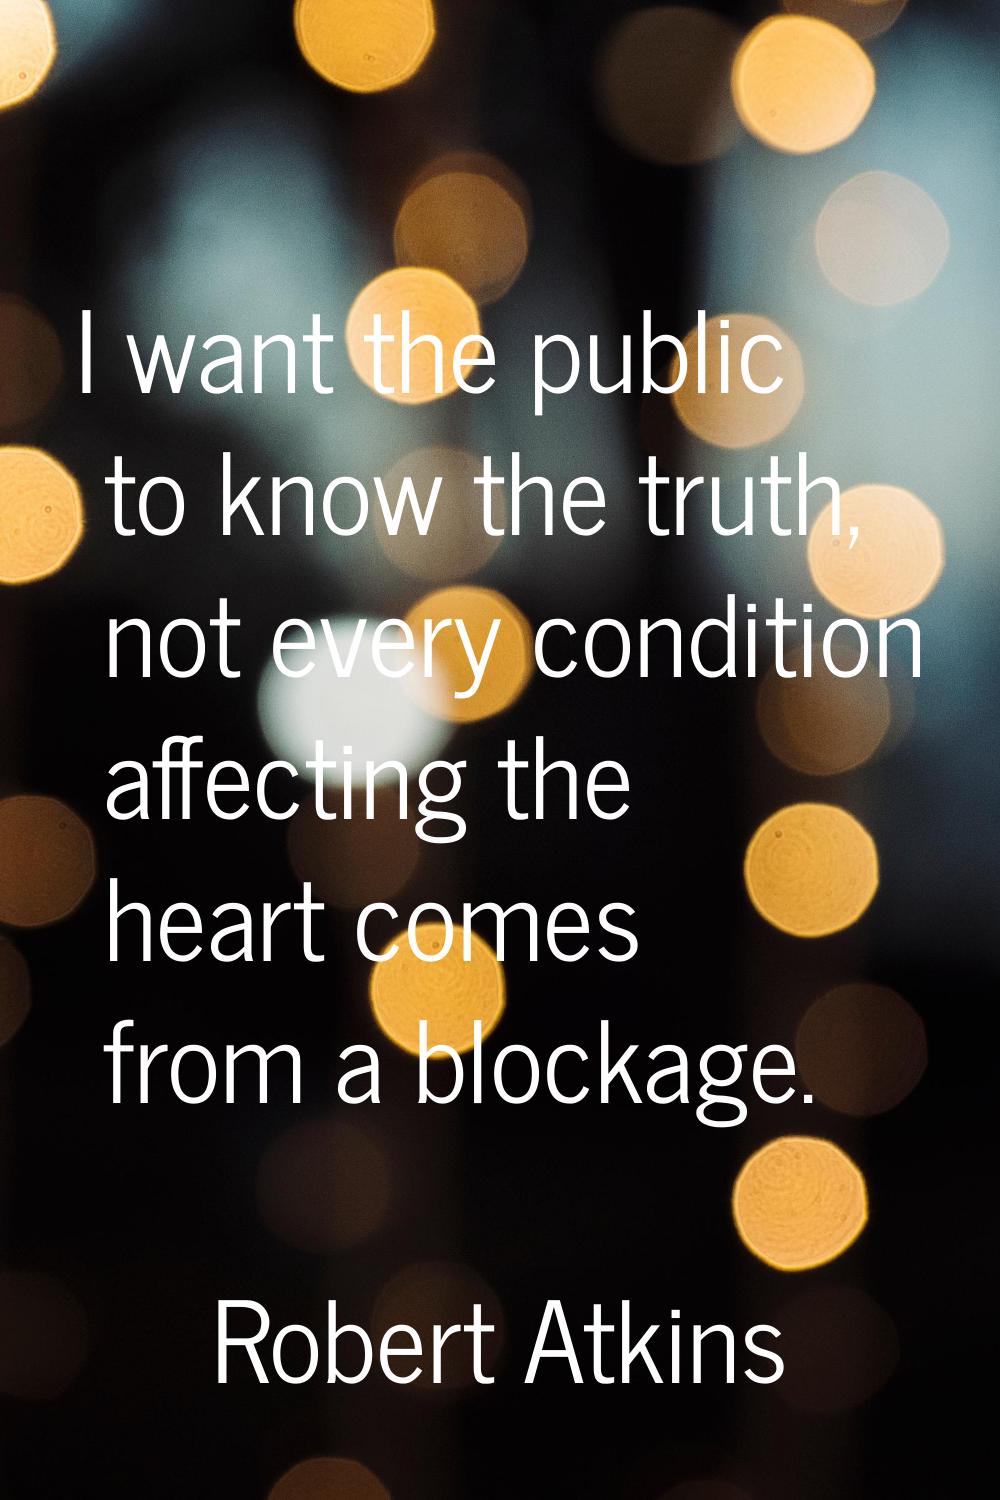 I want the public to know the truth, not every condition affecting the heart comes from a blockage.